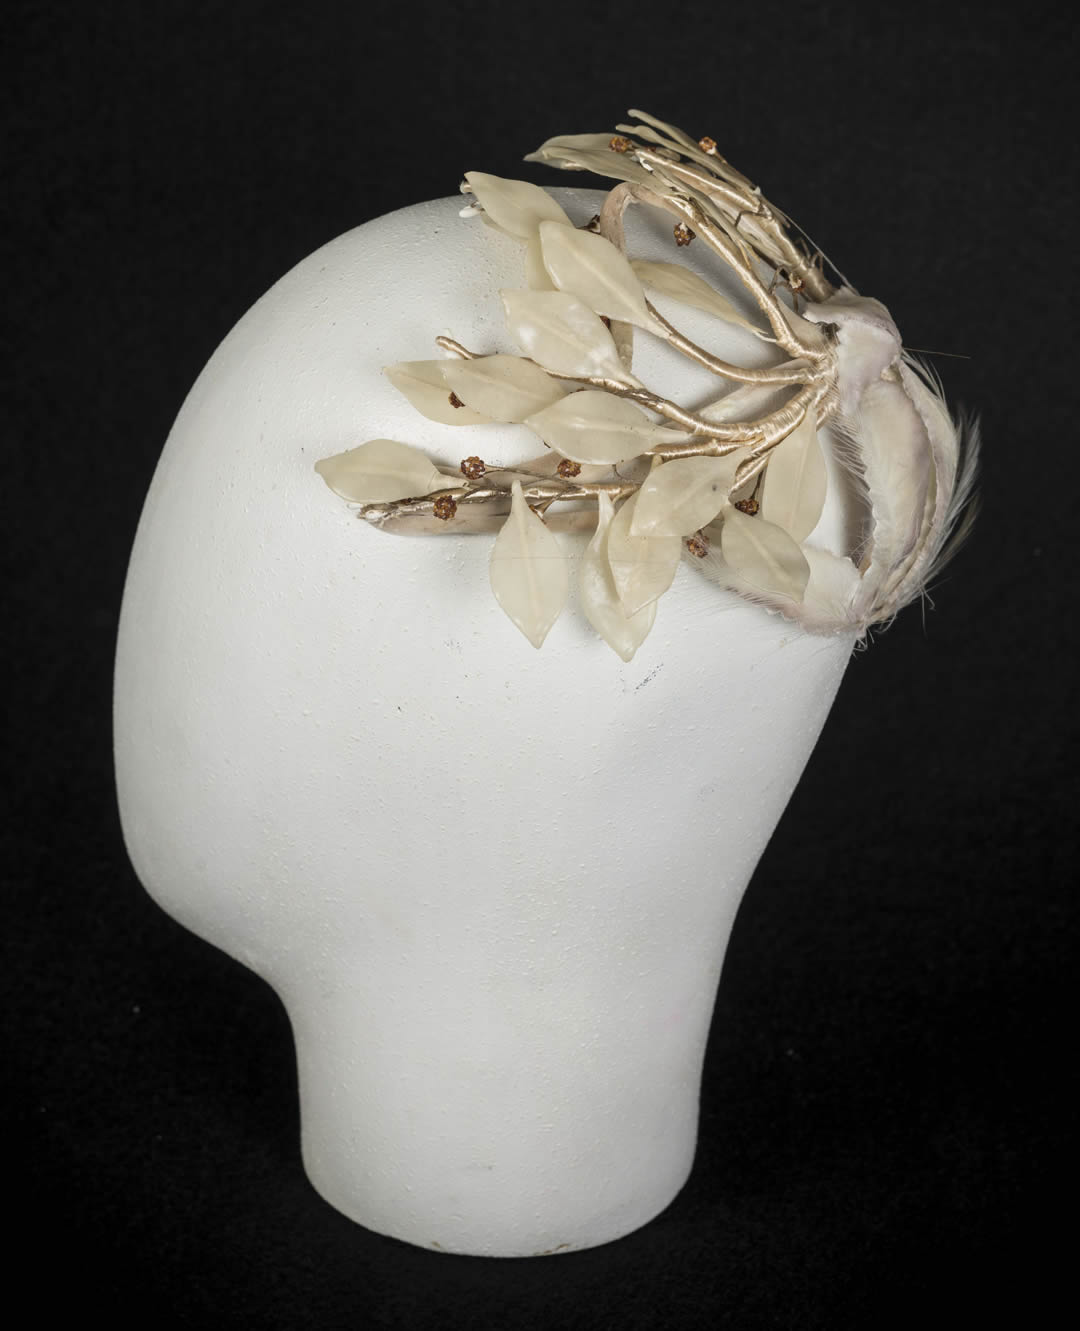 Wired fascinator with stamens, wax leaves, velvet leaves and bird of paradise feathers